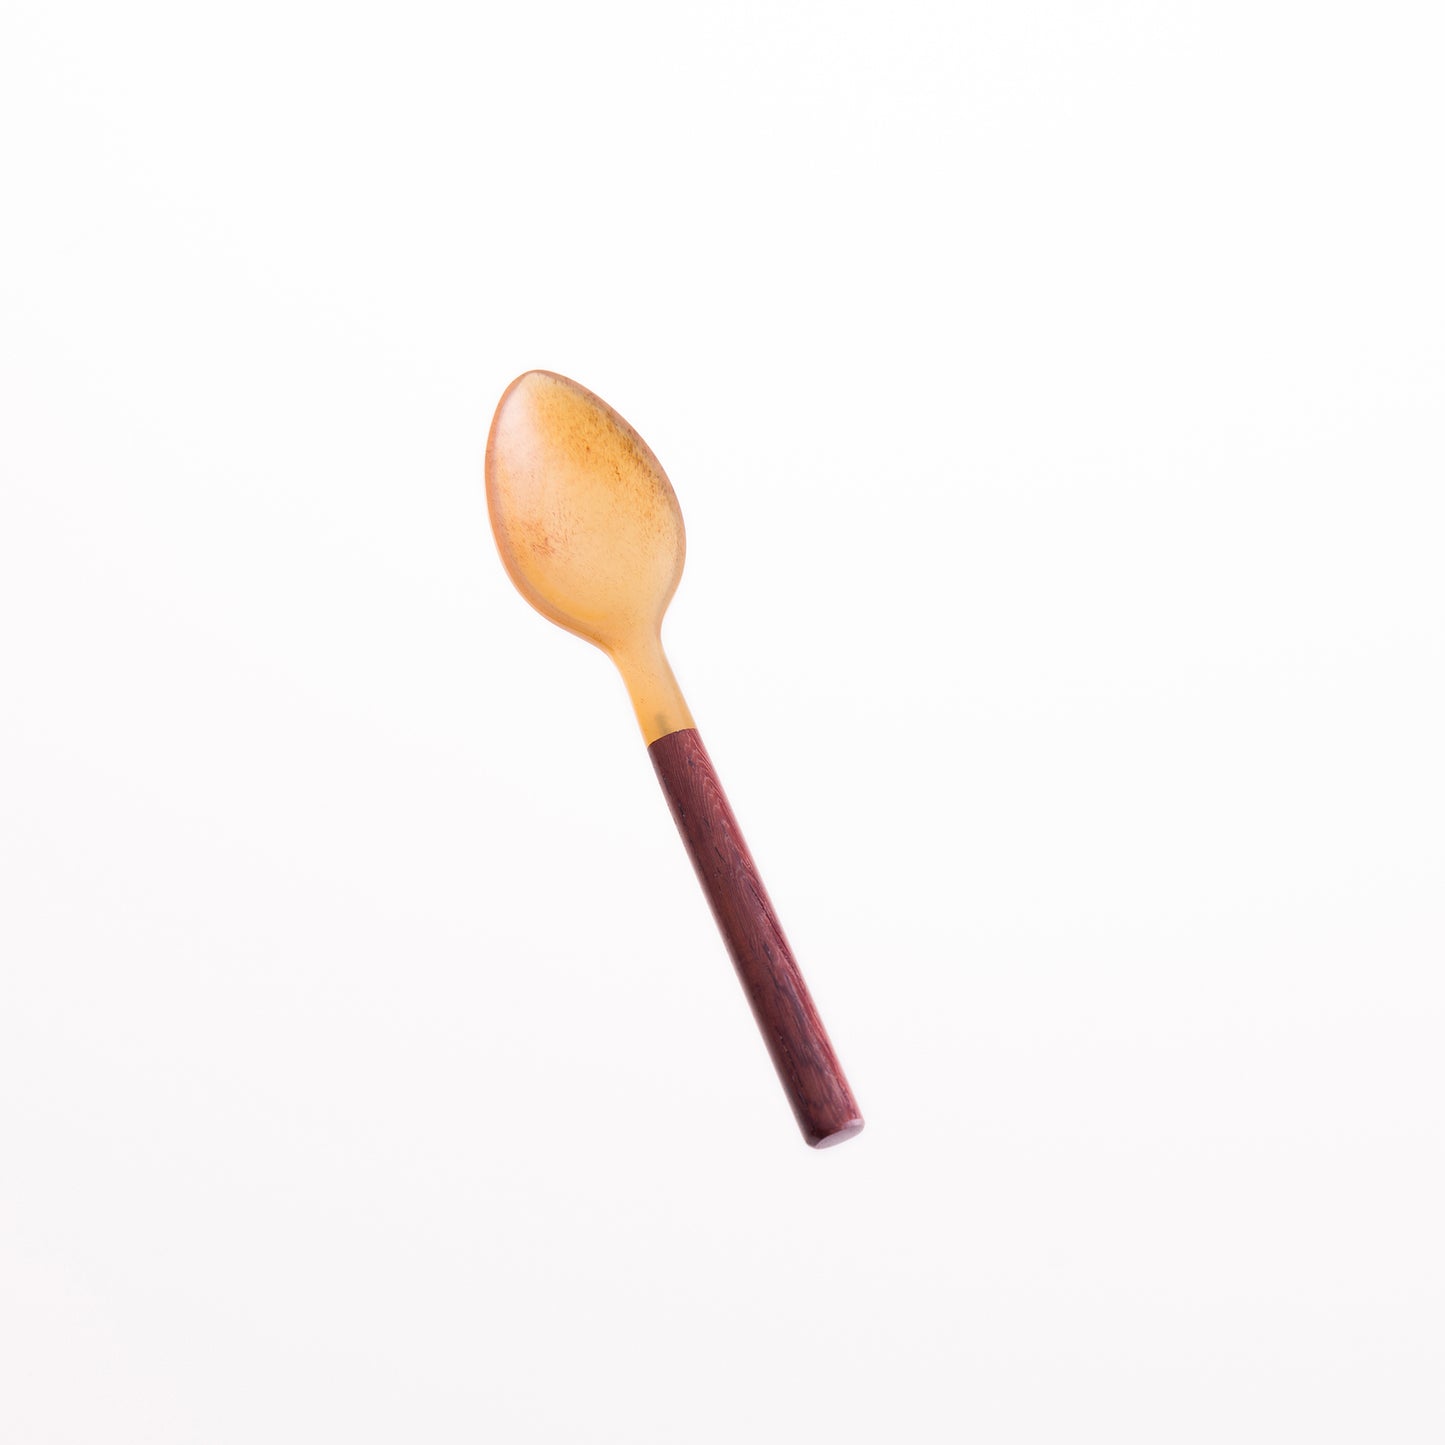 Horn Egg Spoon with Rosewood Handle